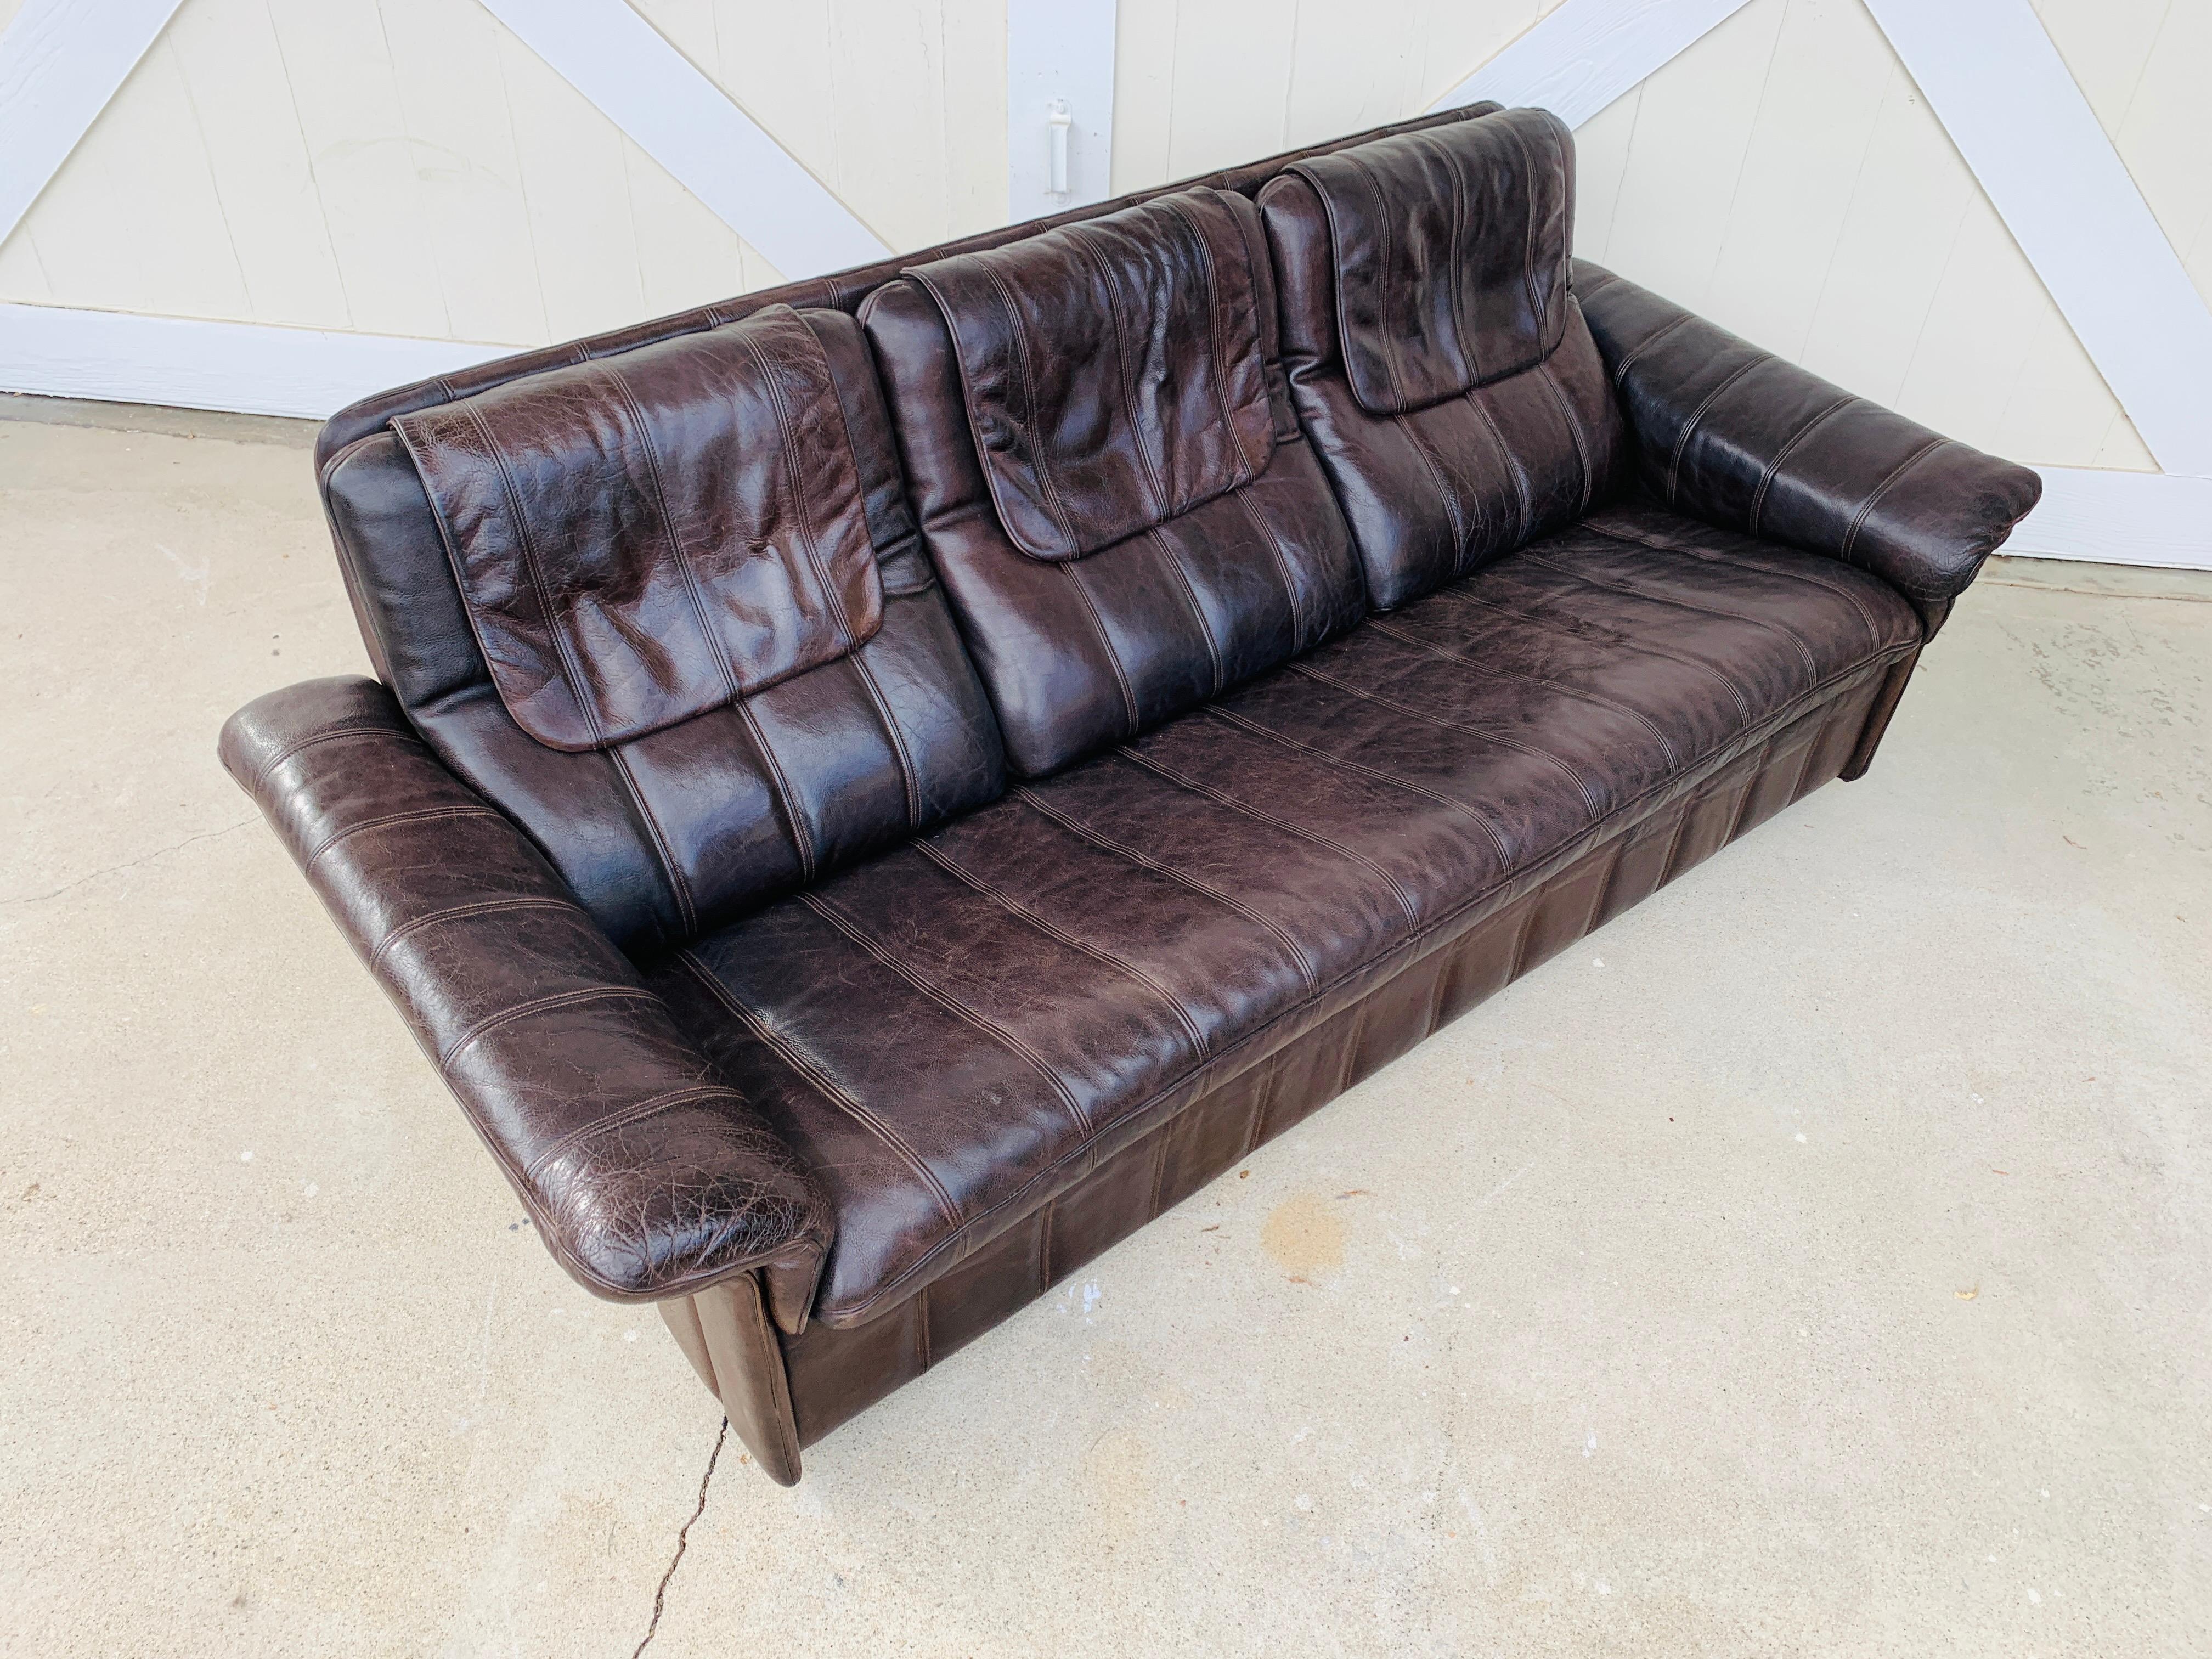 Vintage 3-seat sofa upholstered in brown leather designed and manufactured in Switzerland by De Sede.

The piece is all original and is in good vintage condition.

Measurements:
79 inches wide x 33 inches deep x 31 inches high x 16.5 inches